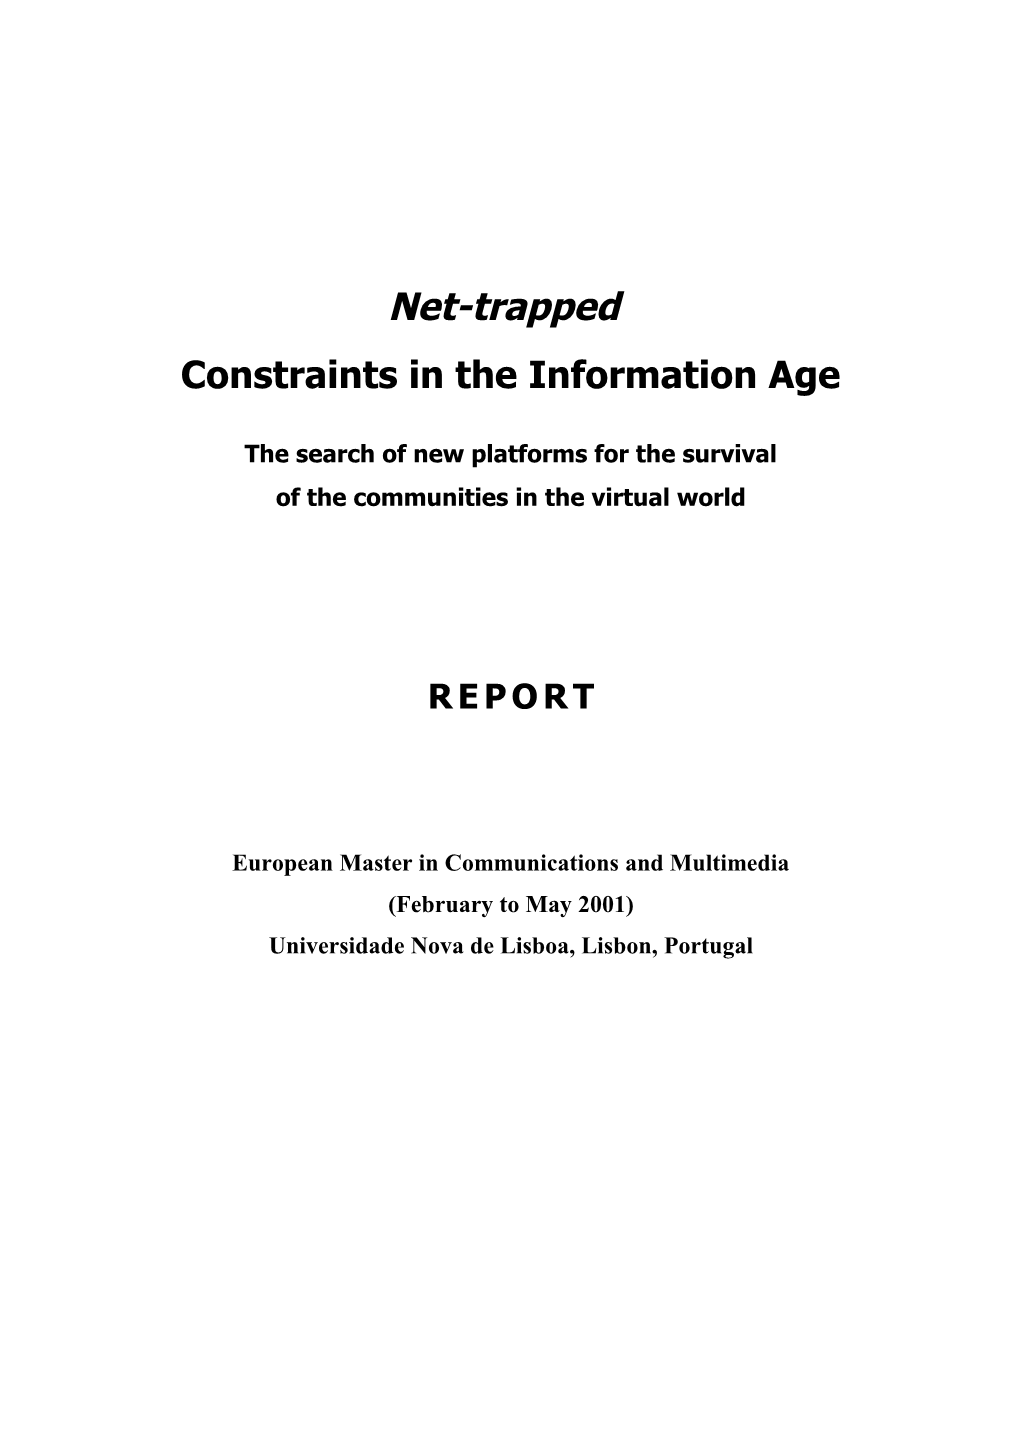 Net-Trapped Constraints in the Information Age